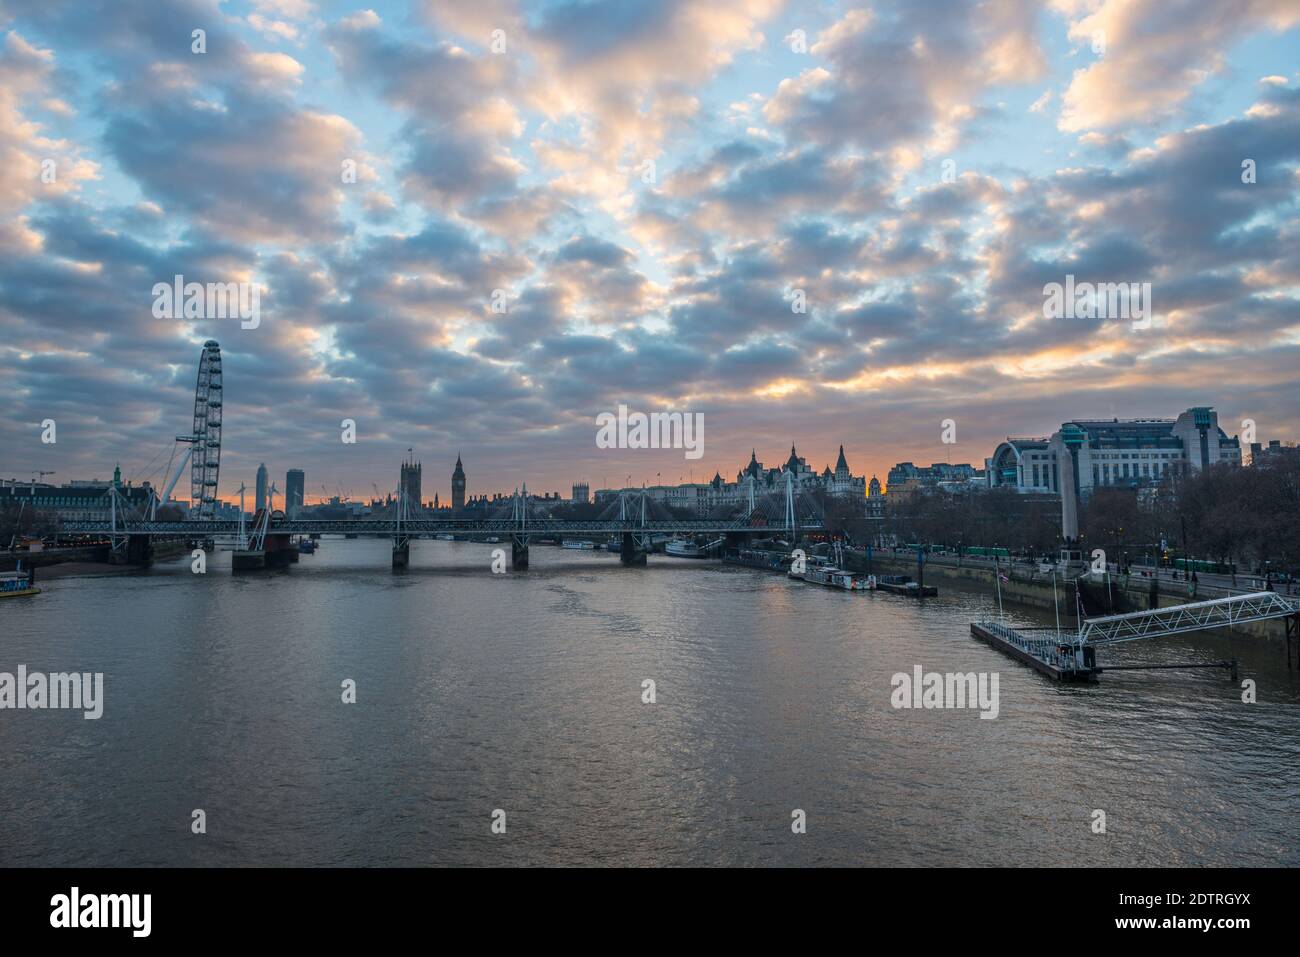 Sunset over the Thames River in London, England. Stock Photo